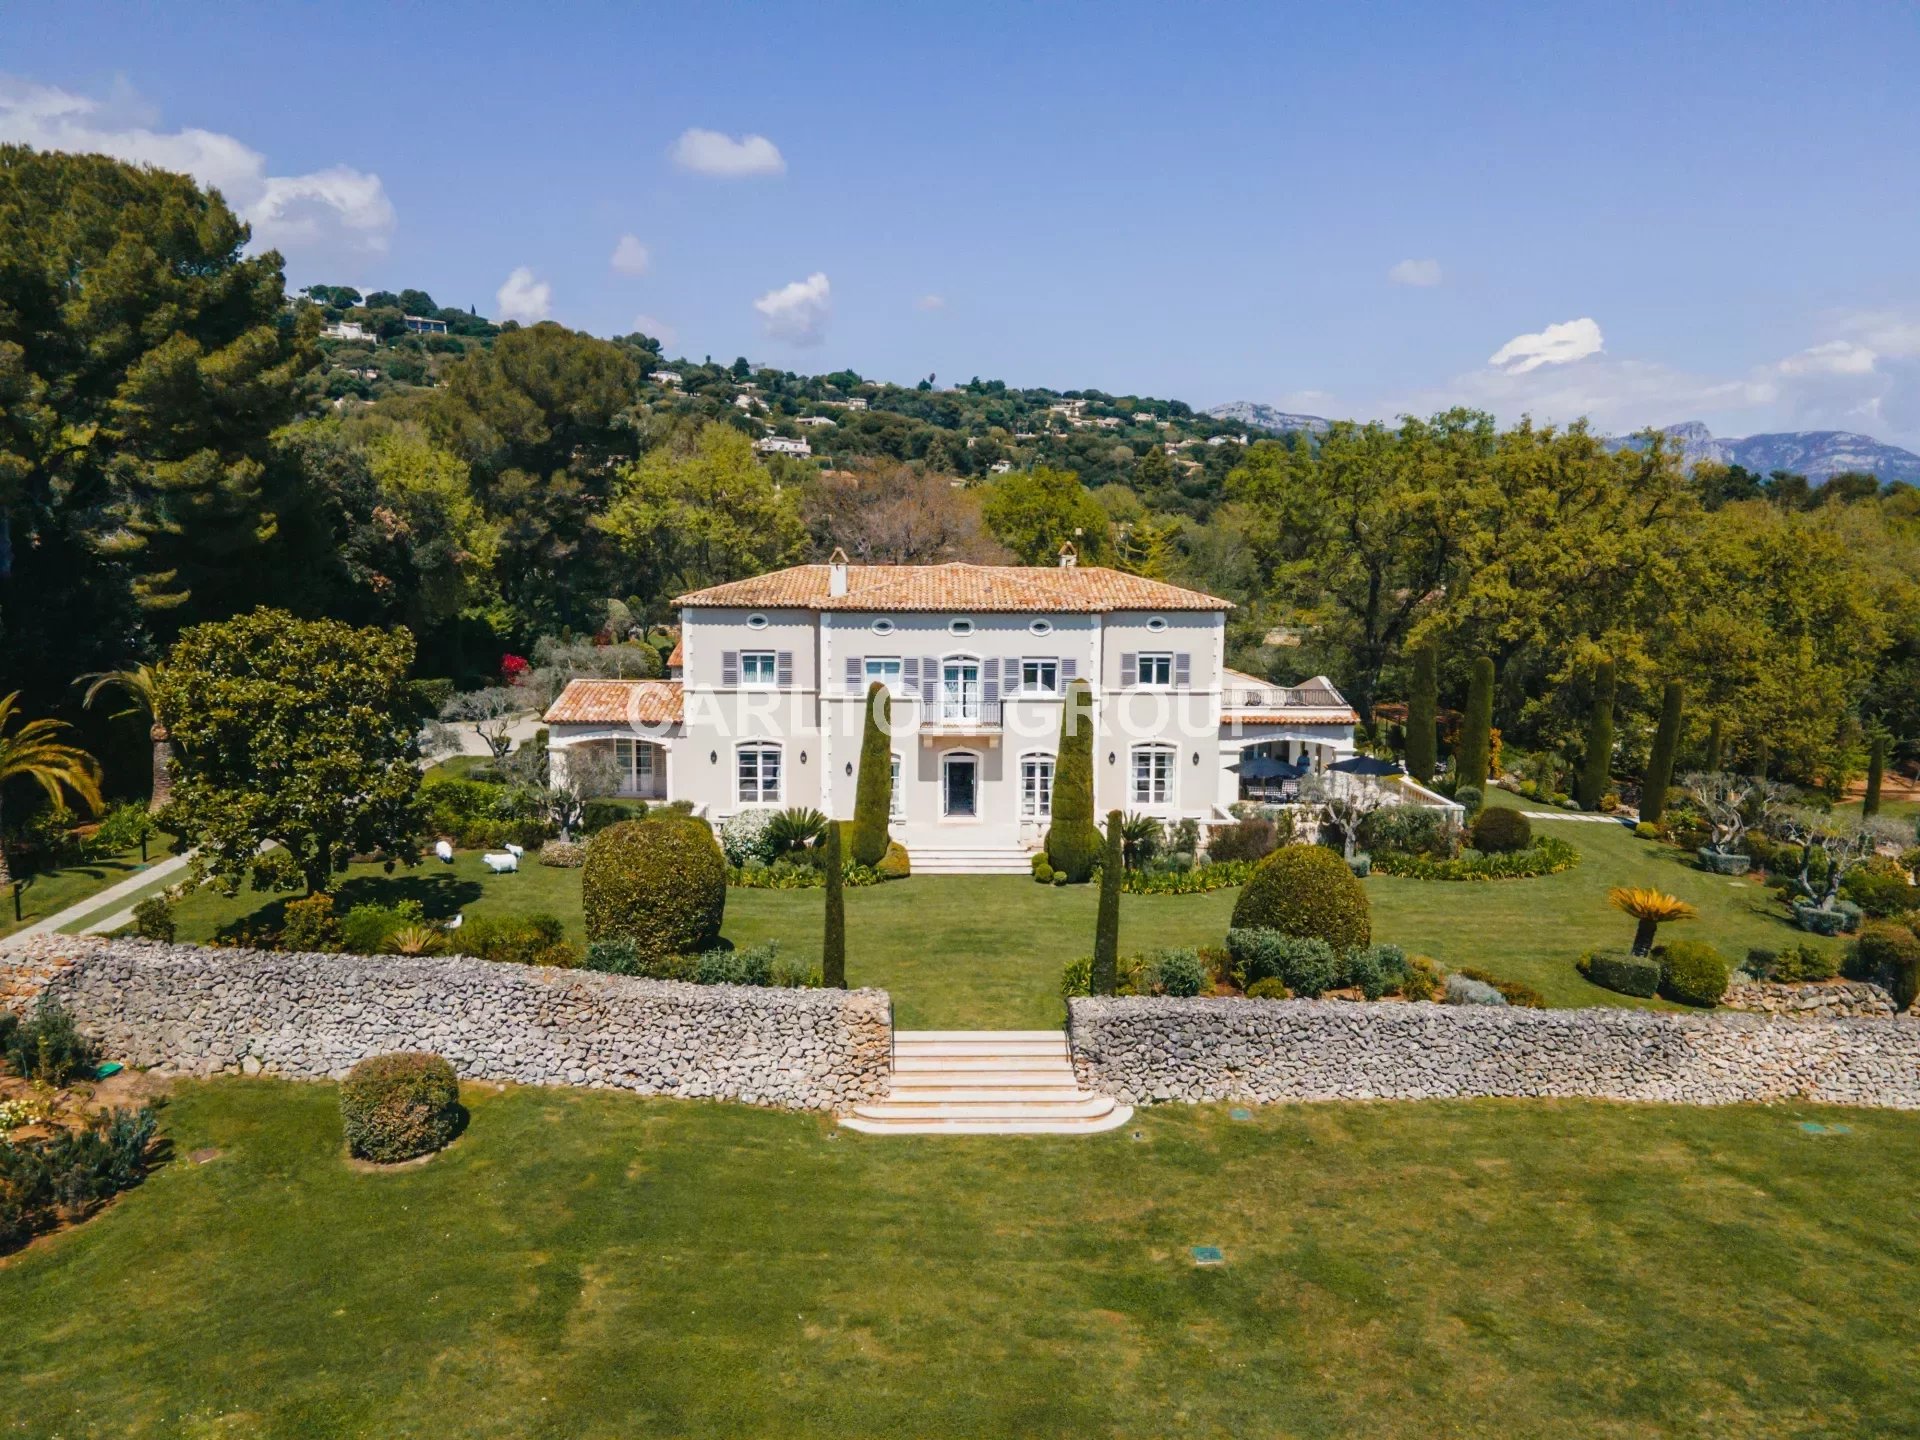 Exceptional 7 bedroom estate in the heart of 10 acres of landscaped gardens with tennis court